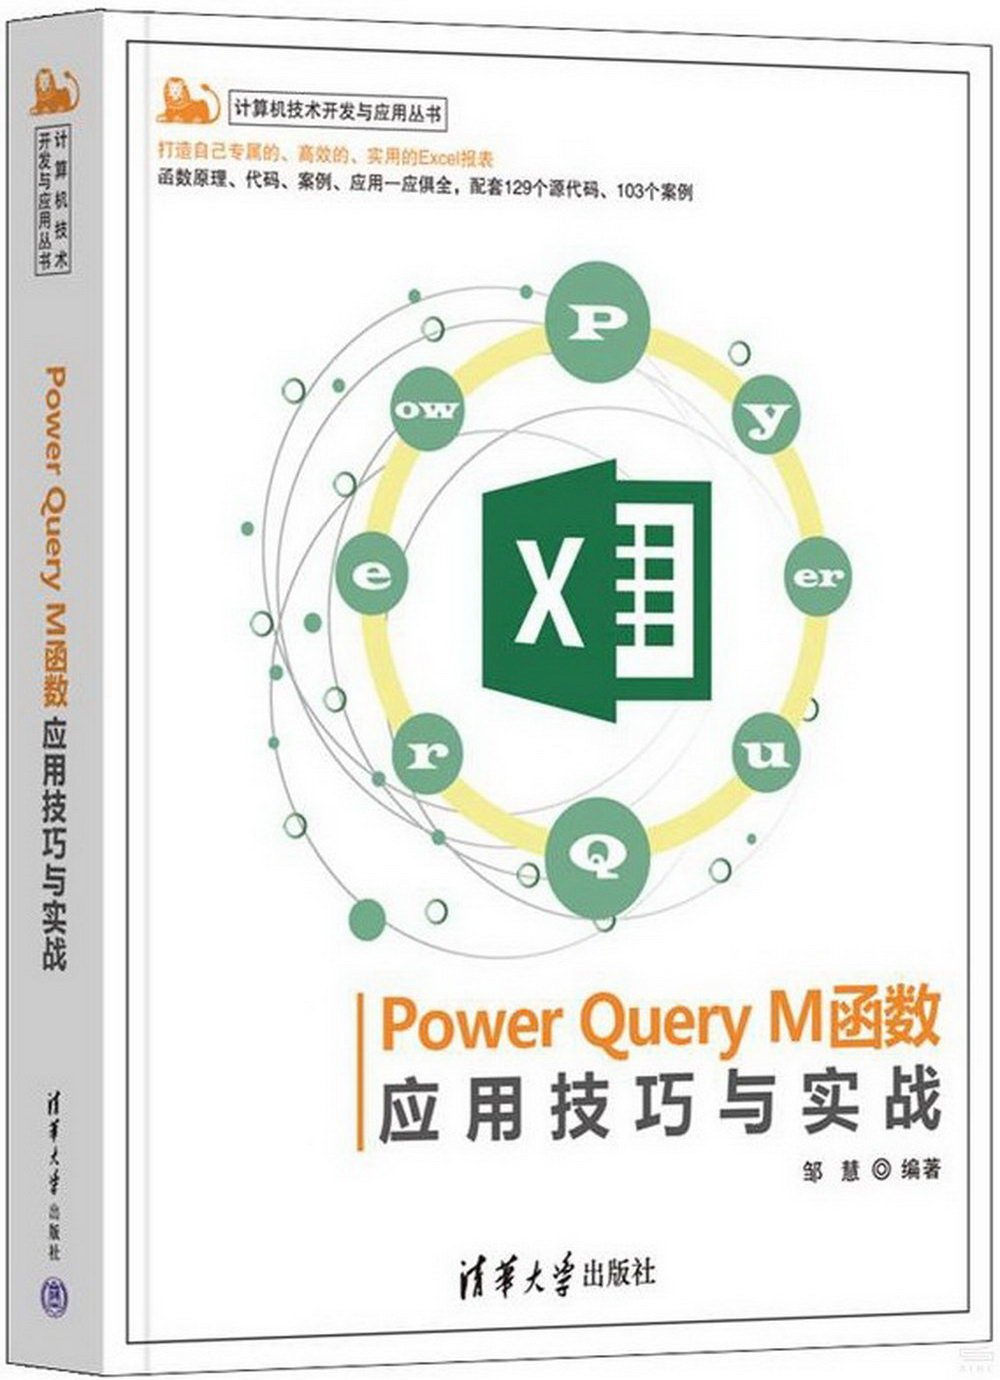 Power Query M函數應用技巧與實戰